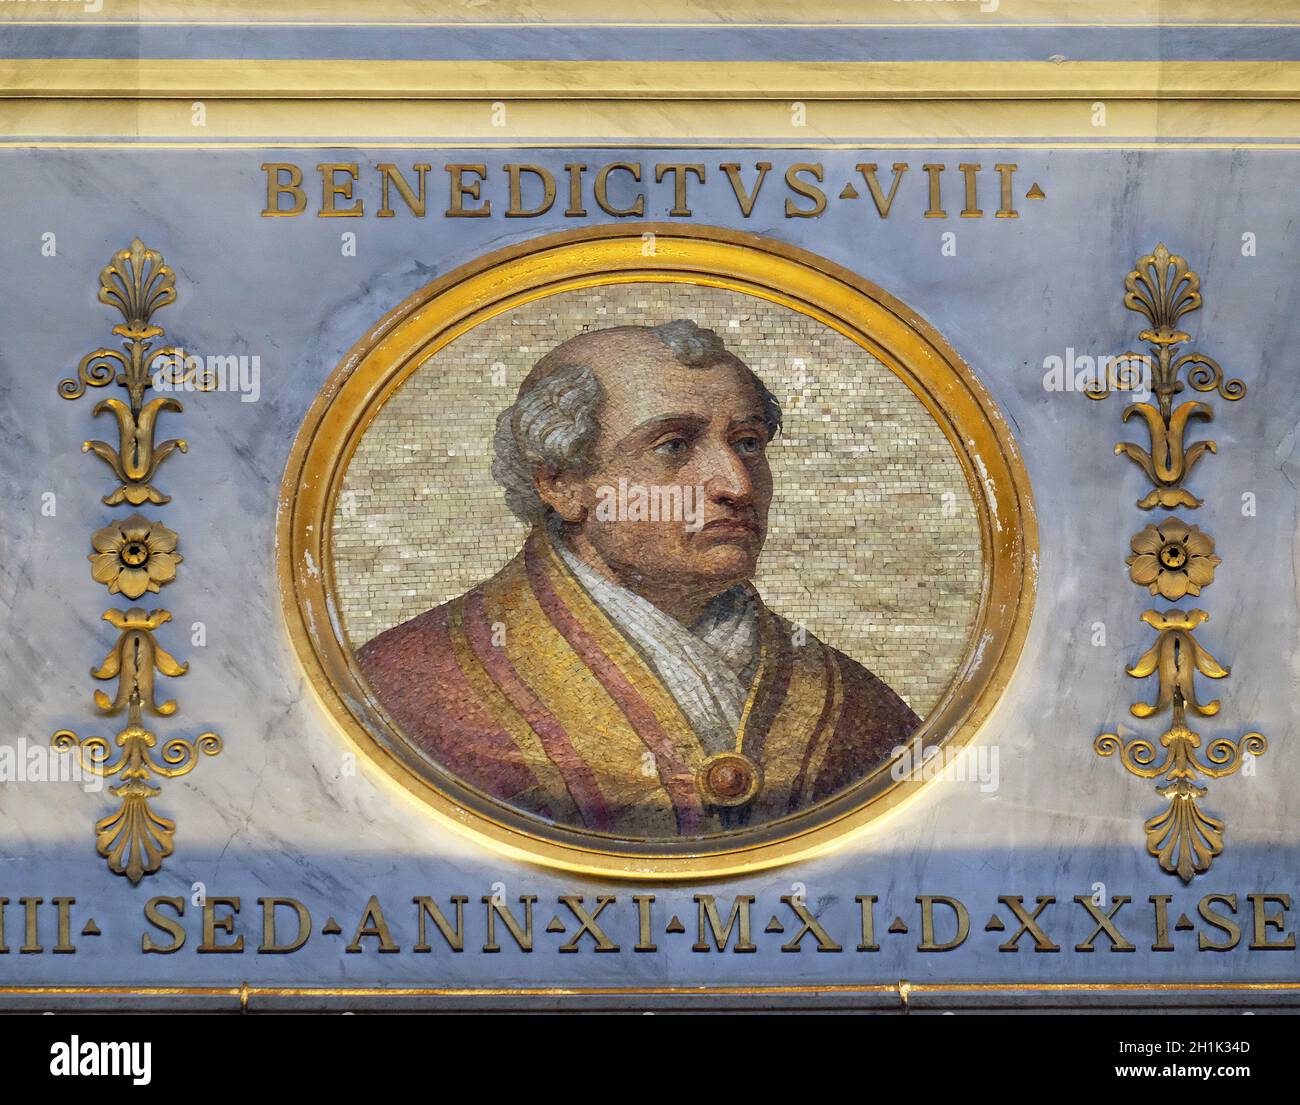 Pope Benedict VIII reigned from 18 May 1012 to his death in 1024, basilica of Saint Paul Outside the Walls, Rome, Italy Stock Photo